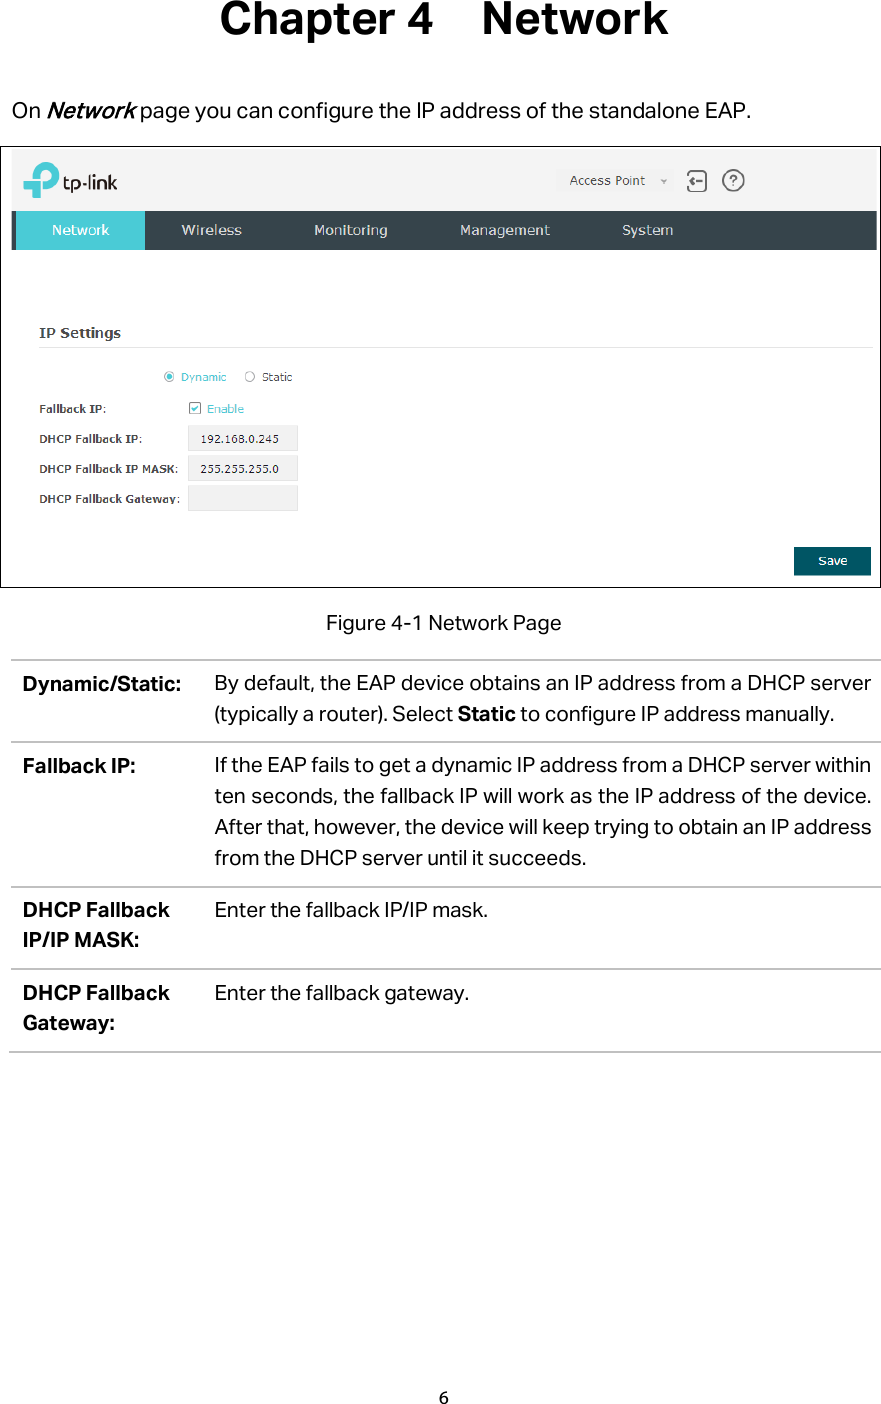 Chapter 4  Network On Network page you can configure the IP address of the standalone EAP.    Figure 4-1 Network Page Dynamic/Static: By default, the EAP device obtains an IP address from a DHCP server (typically a router). Select Static to configure IP address manually. Fallback IP: If the EAP fails to get a dynamic IP address from a DHCP server within ten seconds, the fallback IP will work as the IP address of the device. After that, however, the device will keep trying to obtain an IP address from the DHCP server until it succeeds. DHCP Fallback IP/IP MASK: Enter the fallback IP/IP mask. DHCP Fallback Gateway: Enter the fallback gateway. 6  